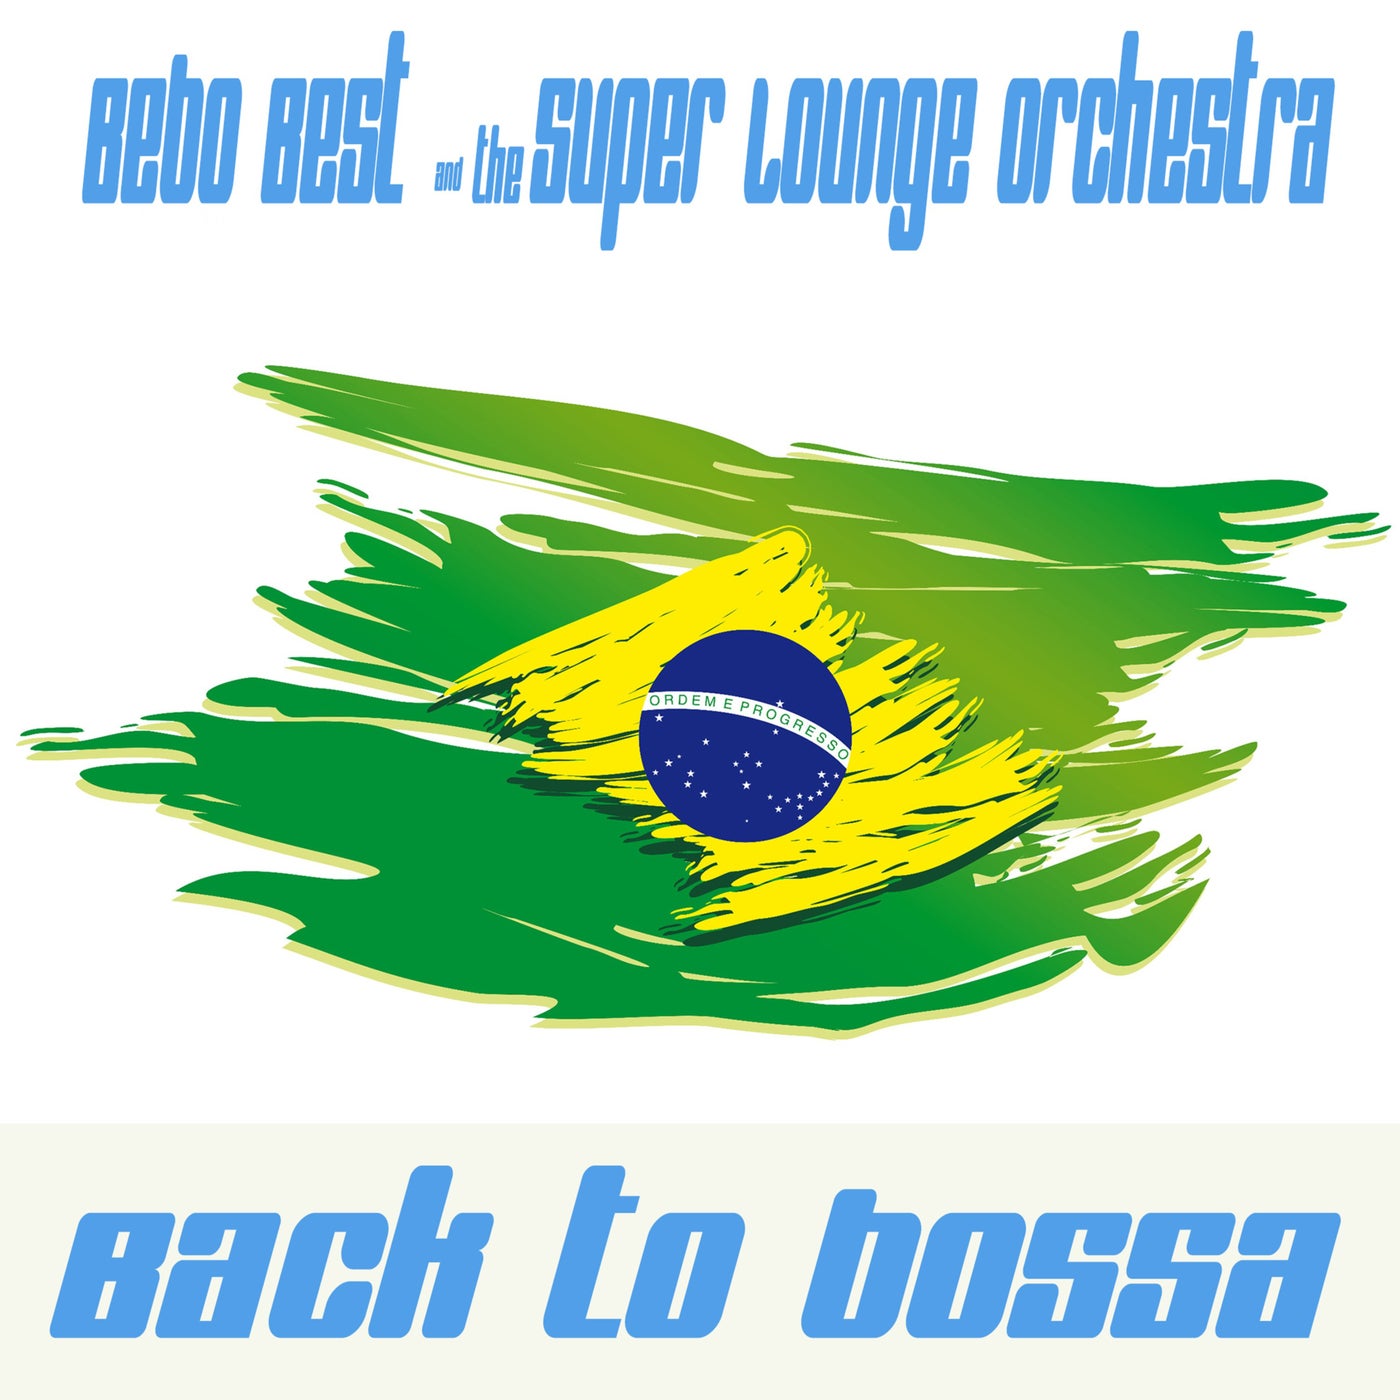 Back to Bossa